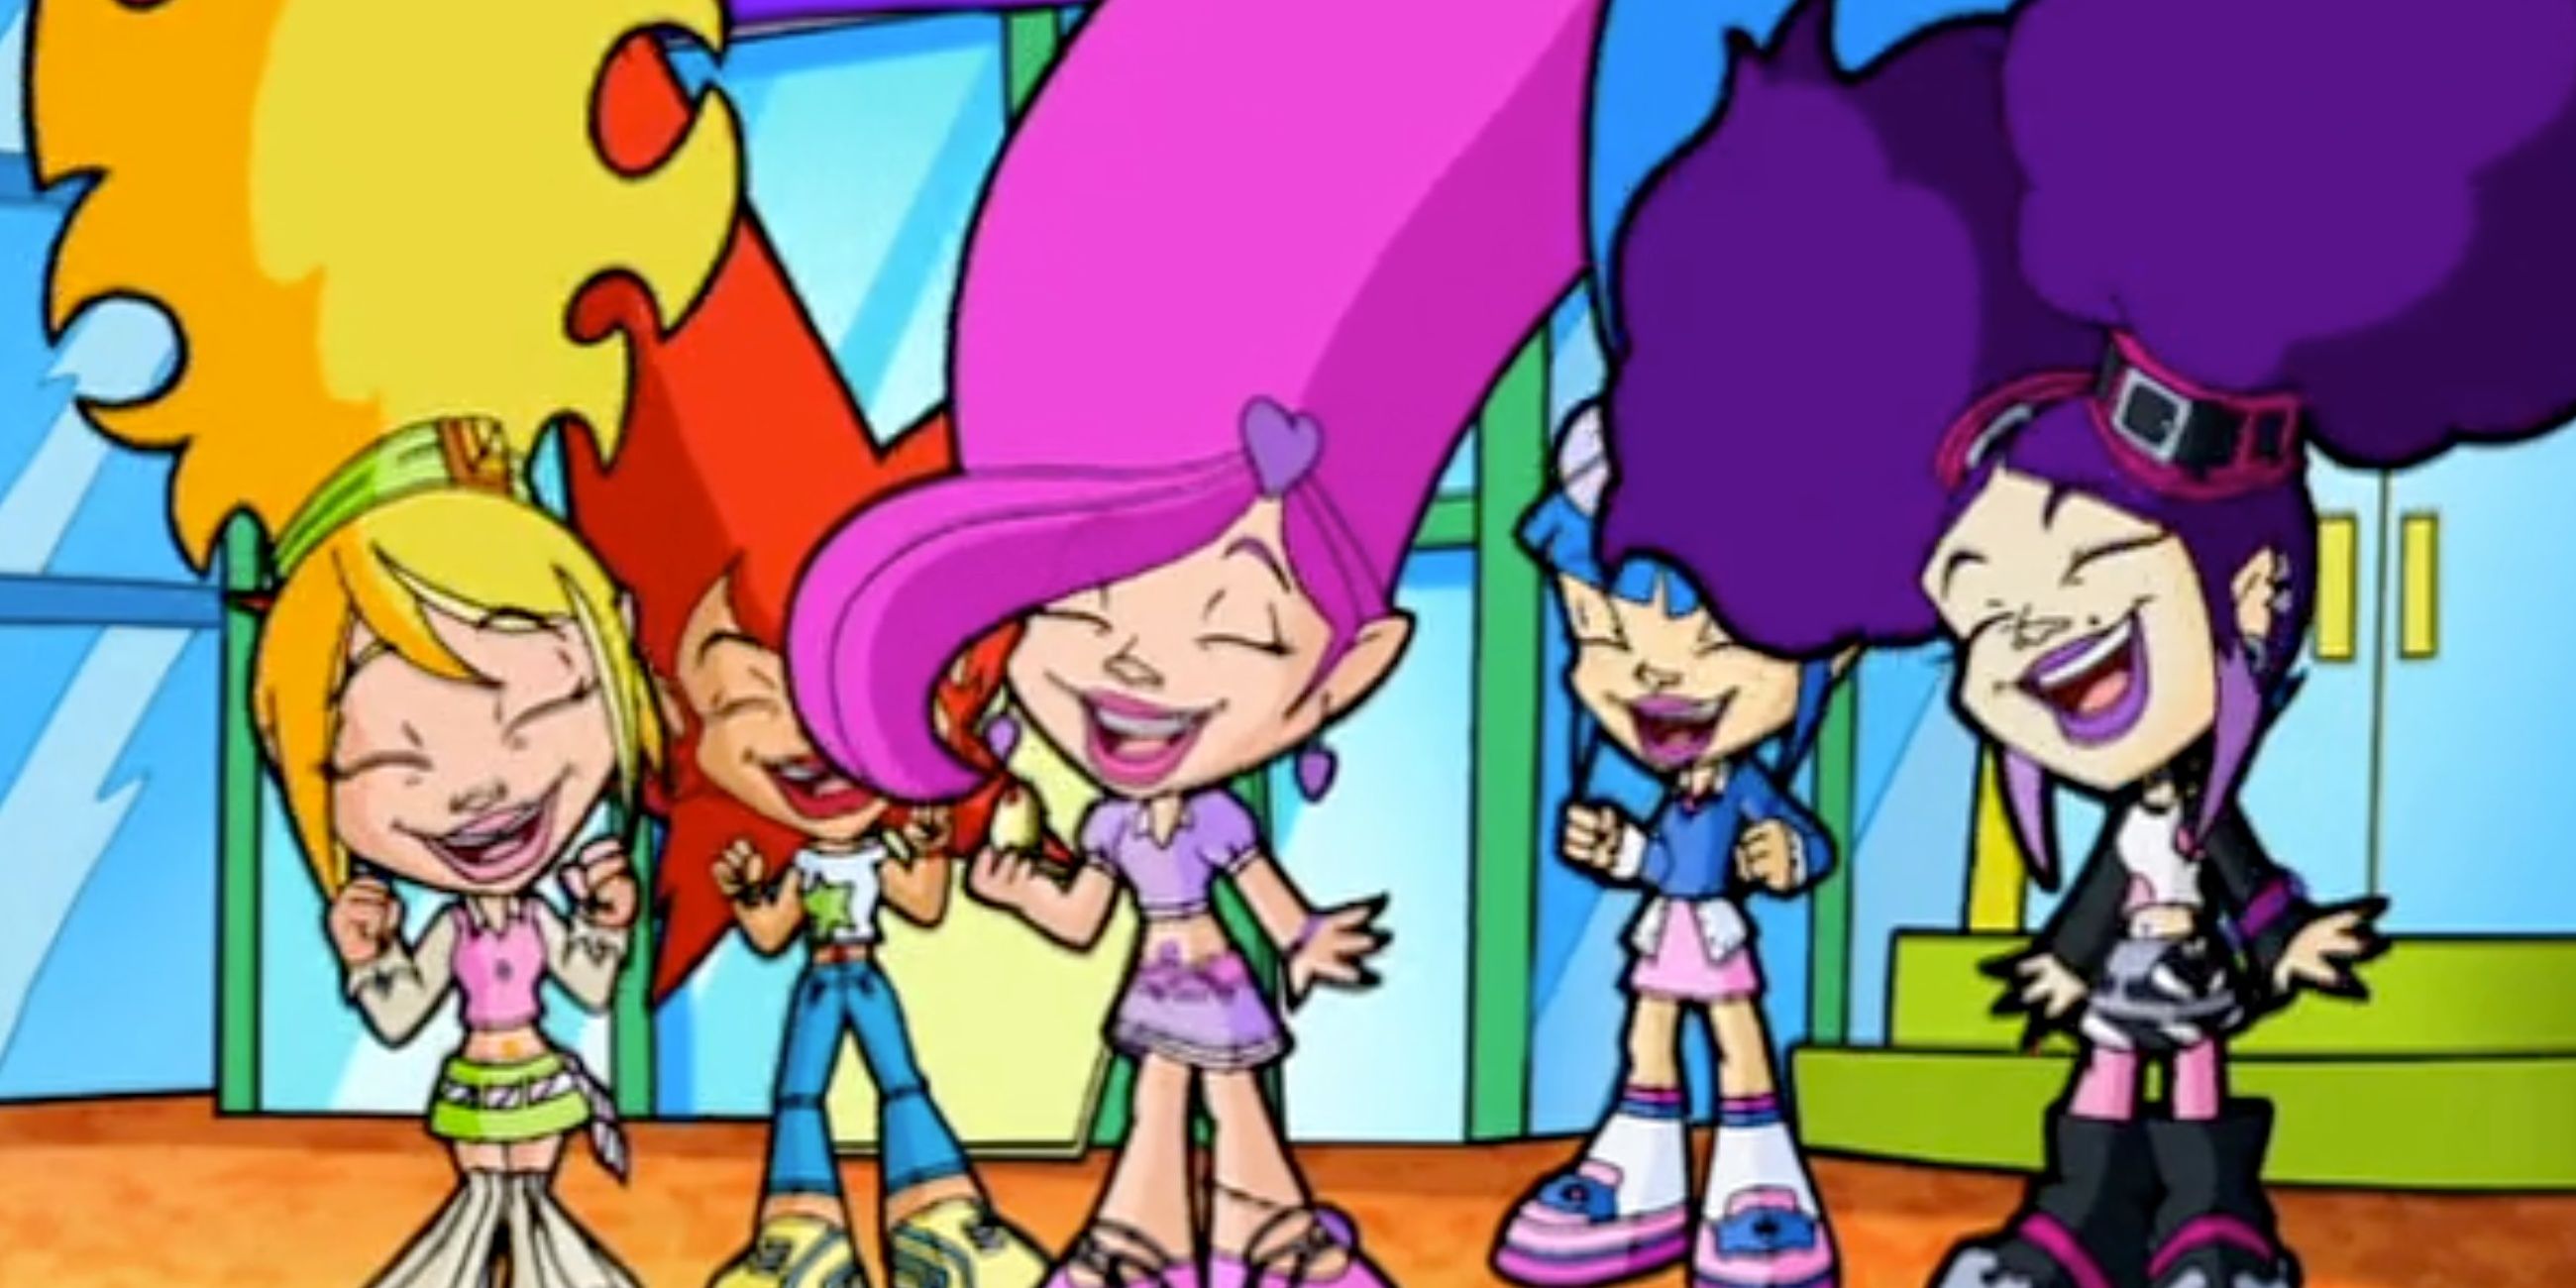 Topaz, Onyx, Amethyst, Opal, and Sapphire posing and smiling in the Trollz cartoon.